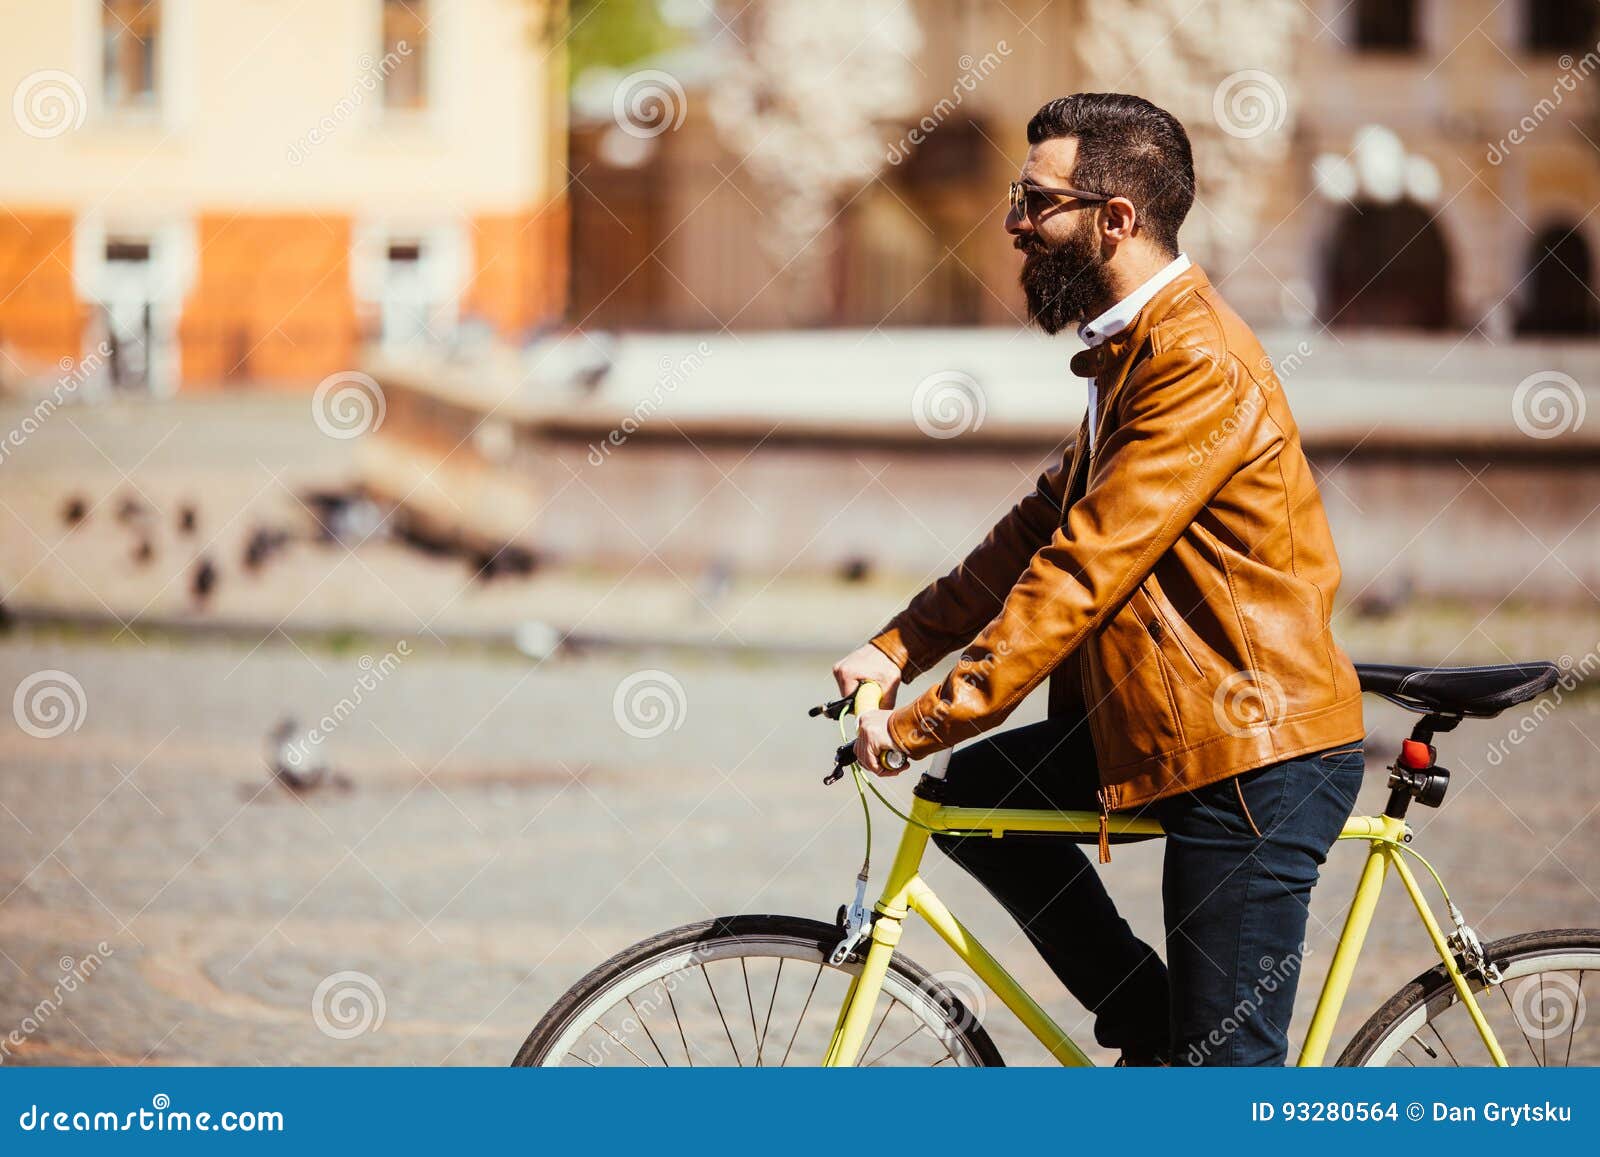 Hipster Man Riding in a Fixie Bike in the Sunny City Streets. Stockfoto ...